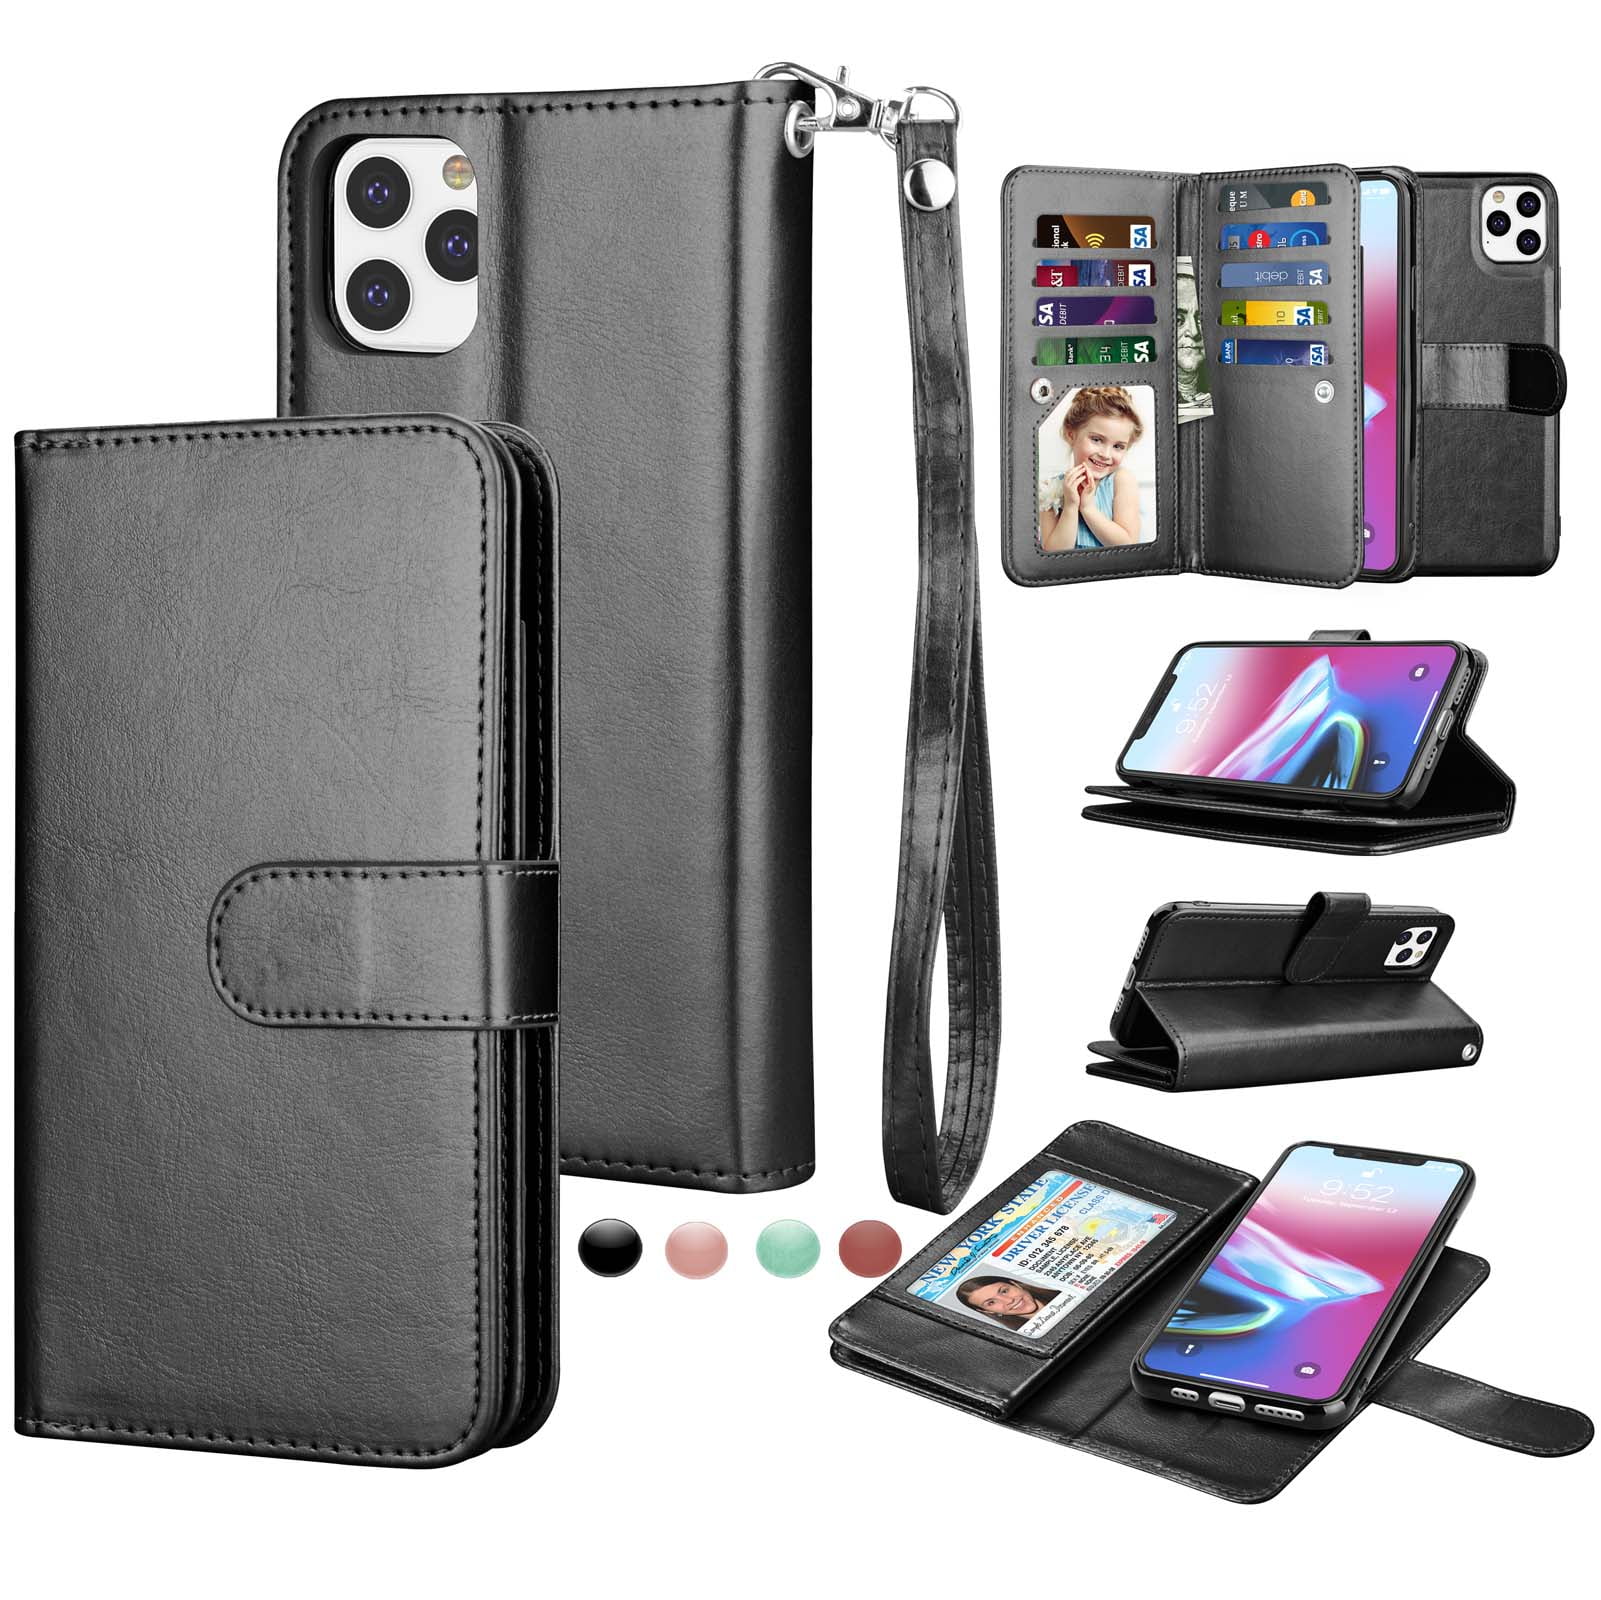 Gray Wallet Case for iPhone 11 Pro Leather Cover Compatible with iPhone 11 Pro 